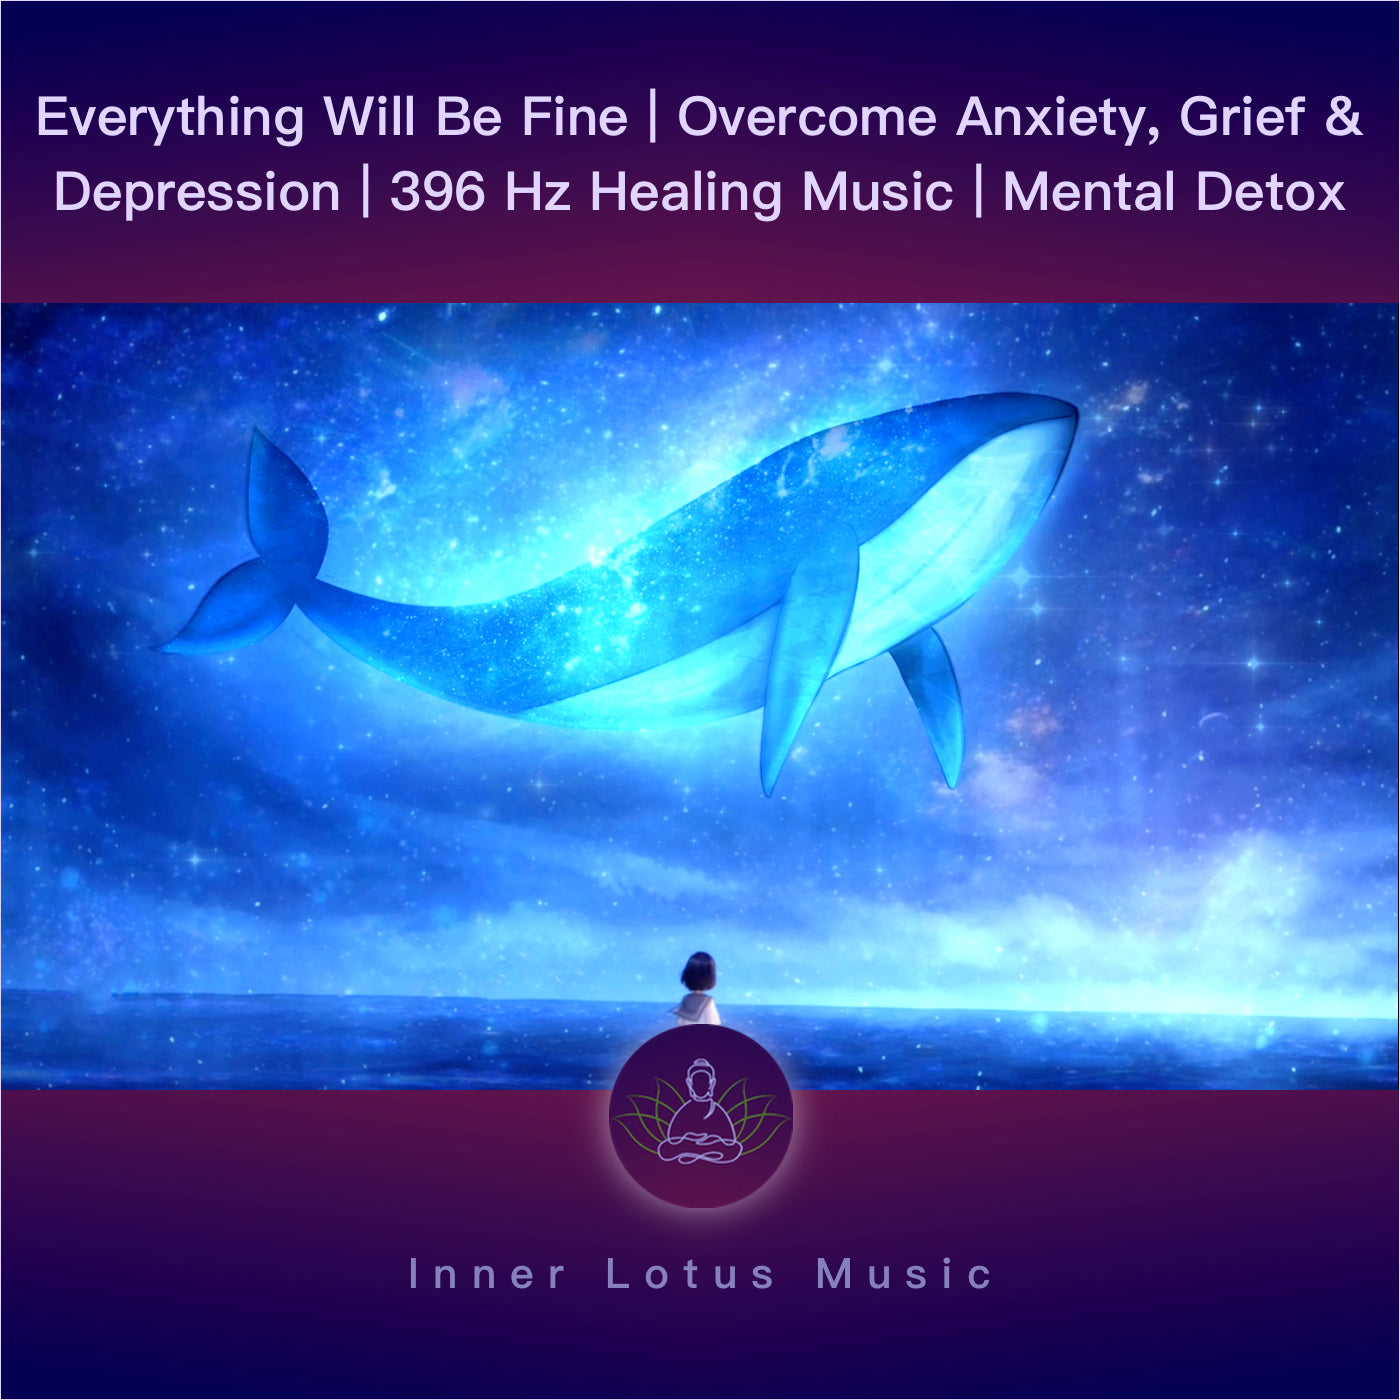 Everything Will Be Fine | Overcome Anxiety, Grief & Depression | 396 Hz Healing Music | Mental Detox